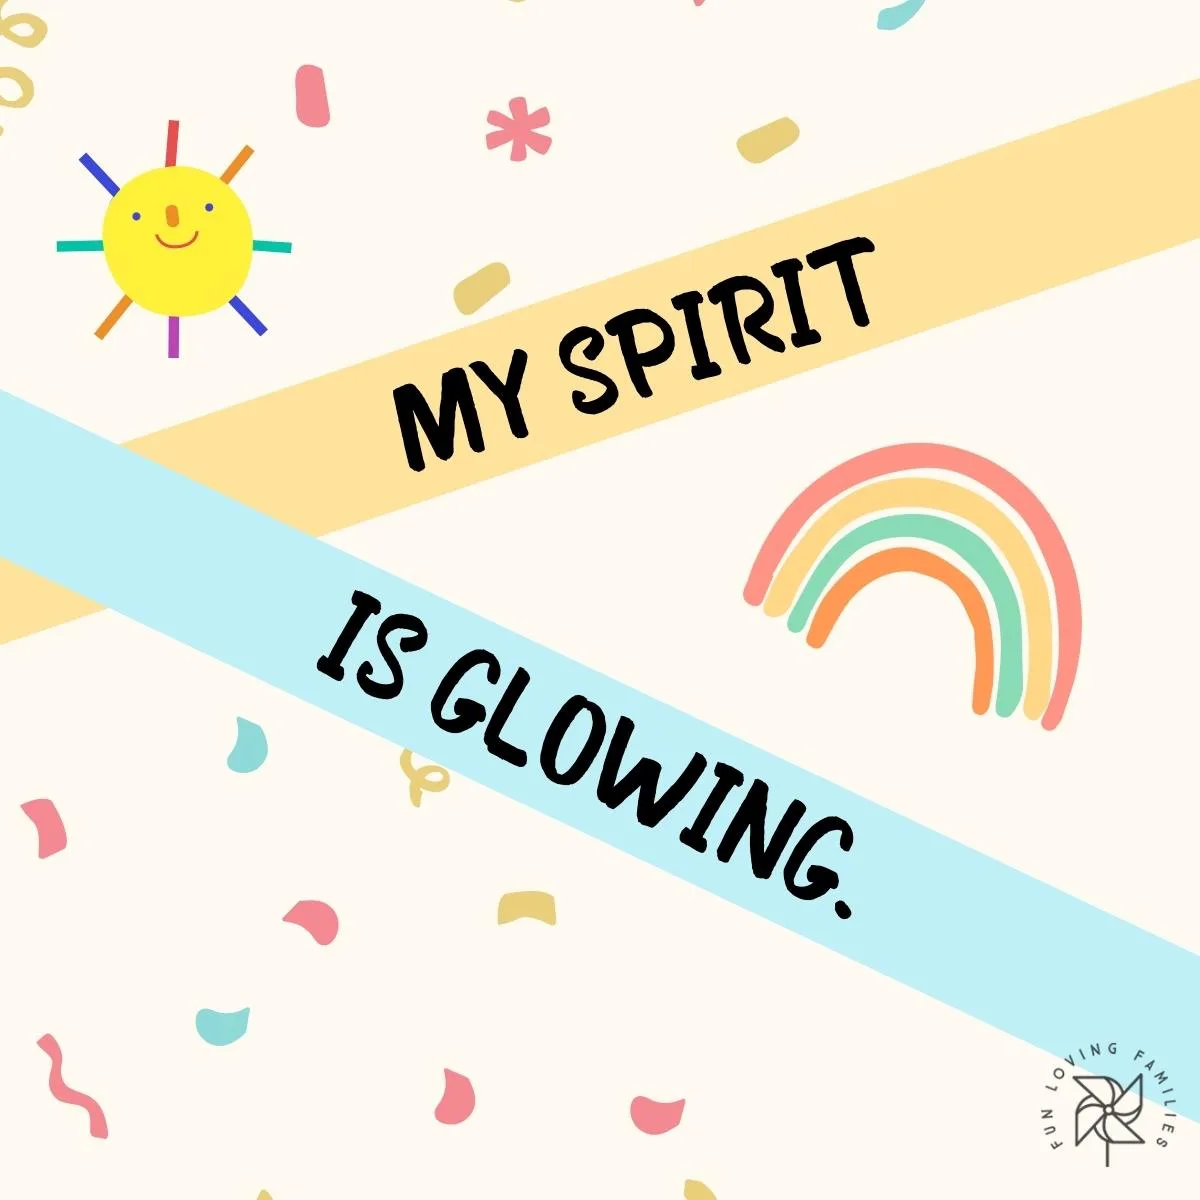 My spirit is glowing affirmation image